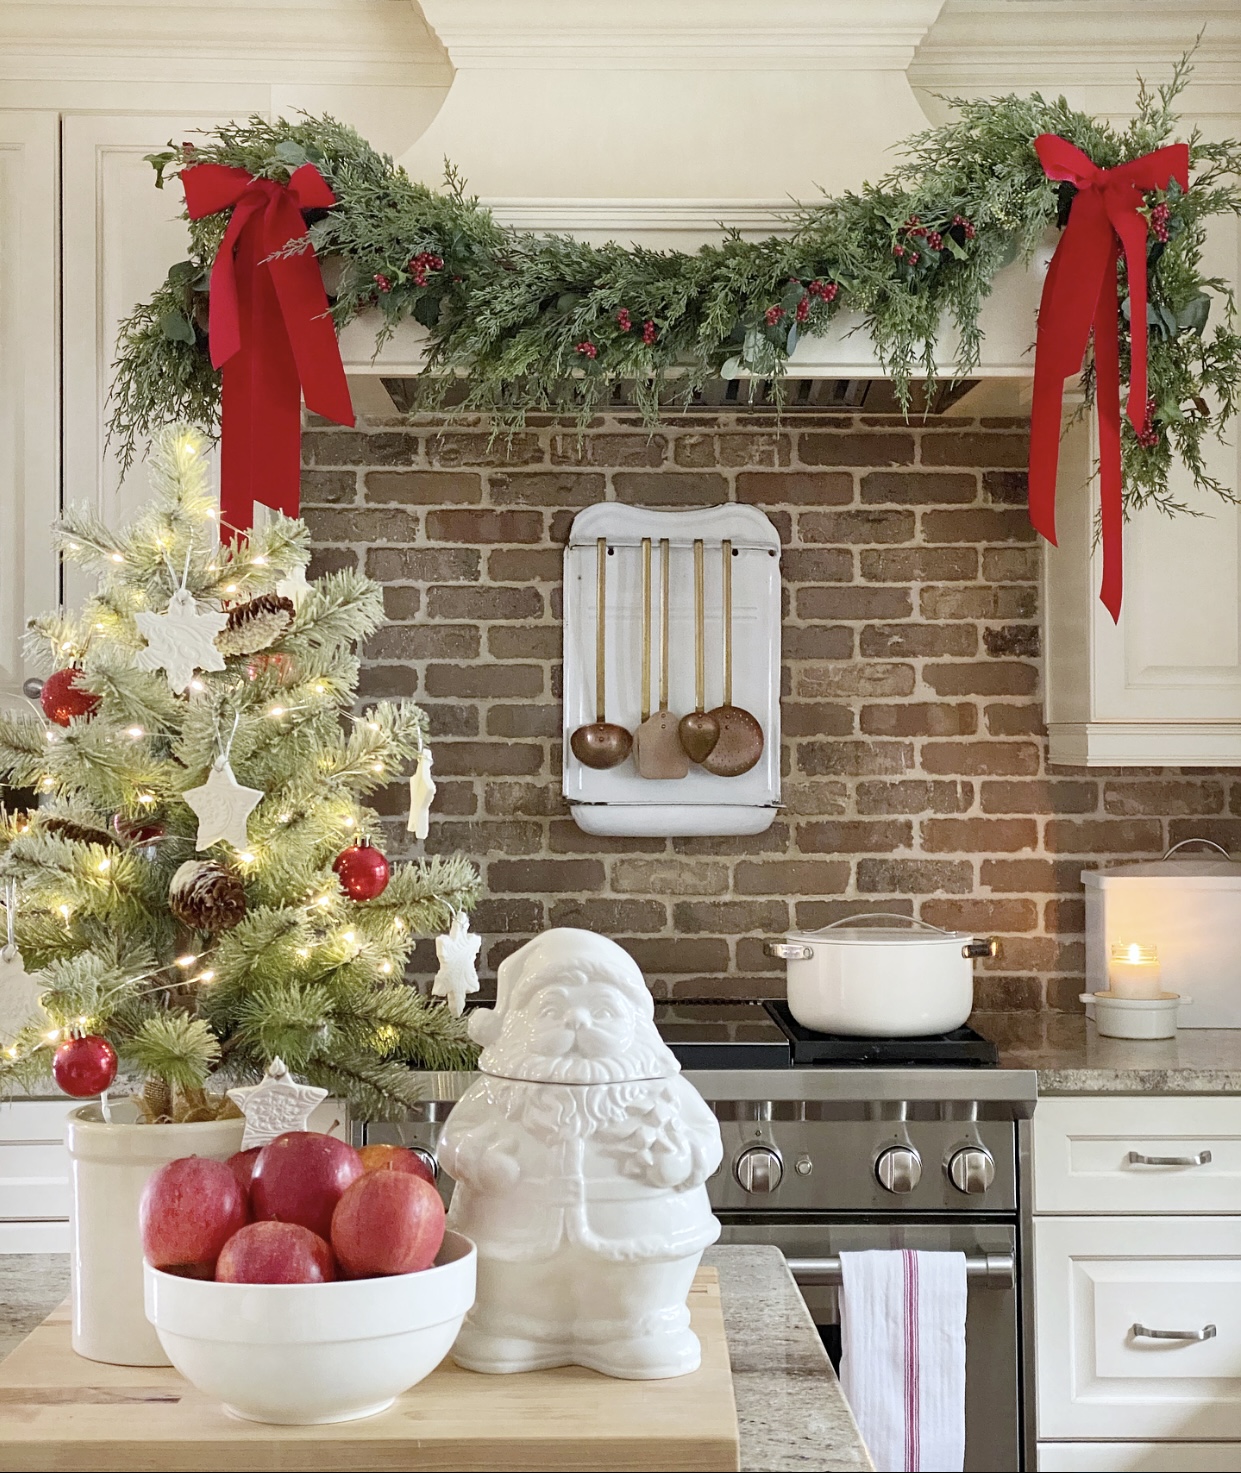 Christmas kitchen view with a mini Christmas tree on on the island with baking soda dough ornaments on it.